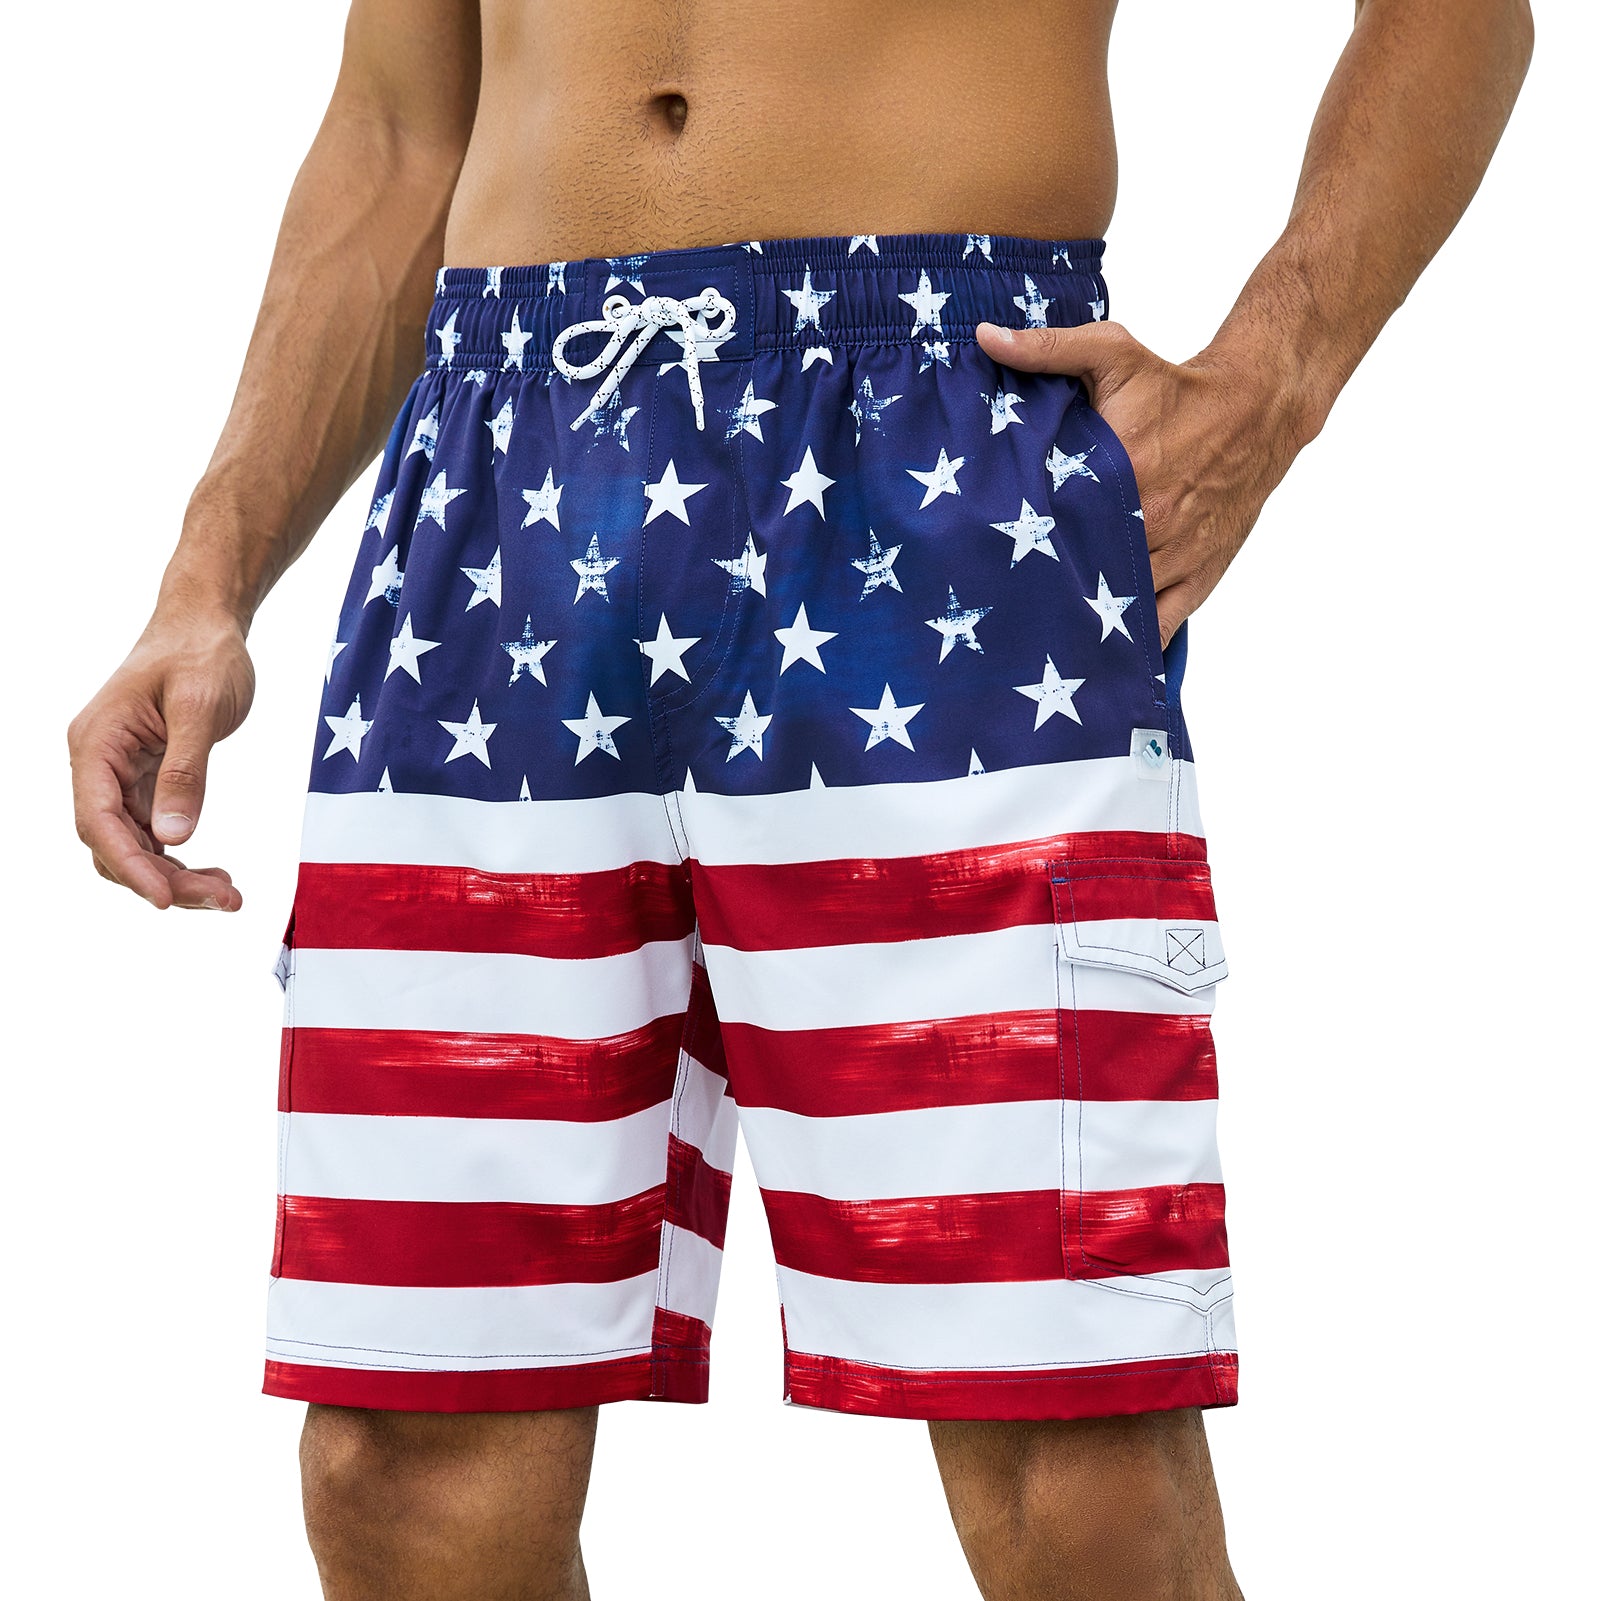 Swimming Trunks Men with Zipper Pocket 2 in 1 Quick Dry Beach